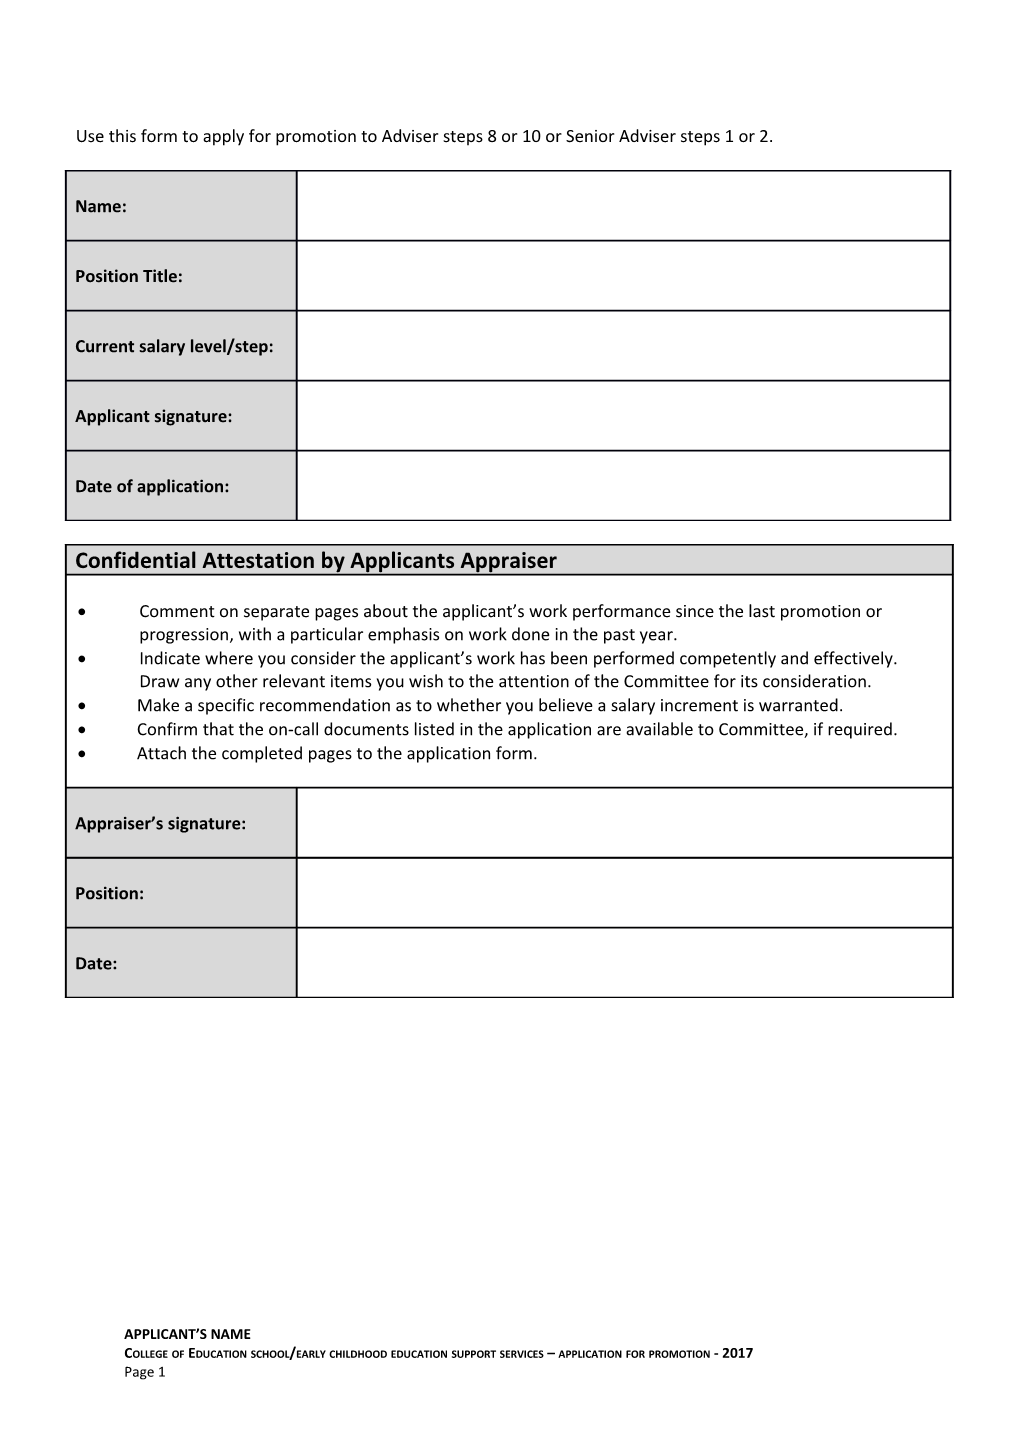 Use This Form to Apply for Promotion to Adviser Steps 8 Or 10 Or Senior Adviser Steps 1 Or 2